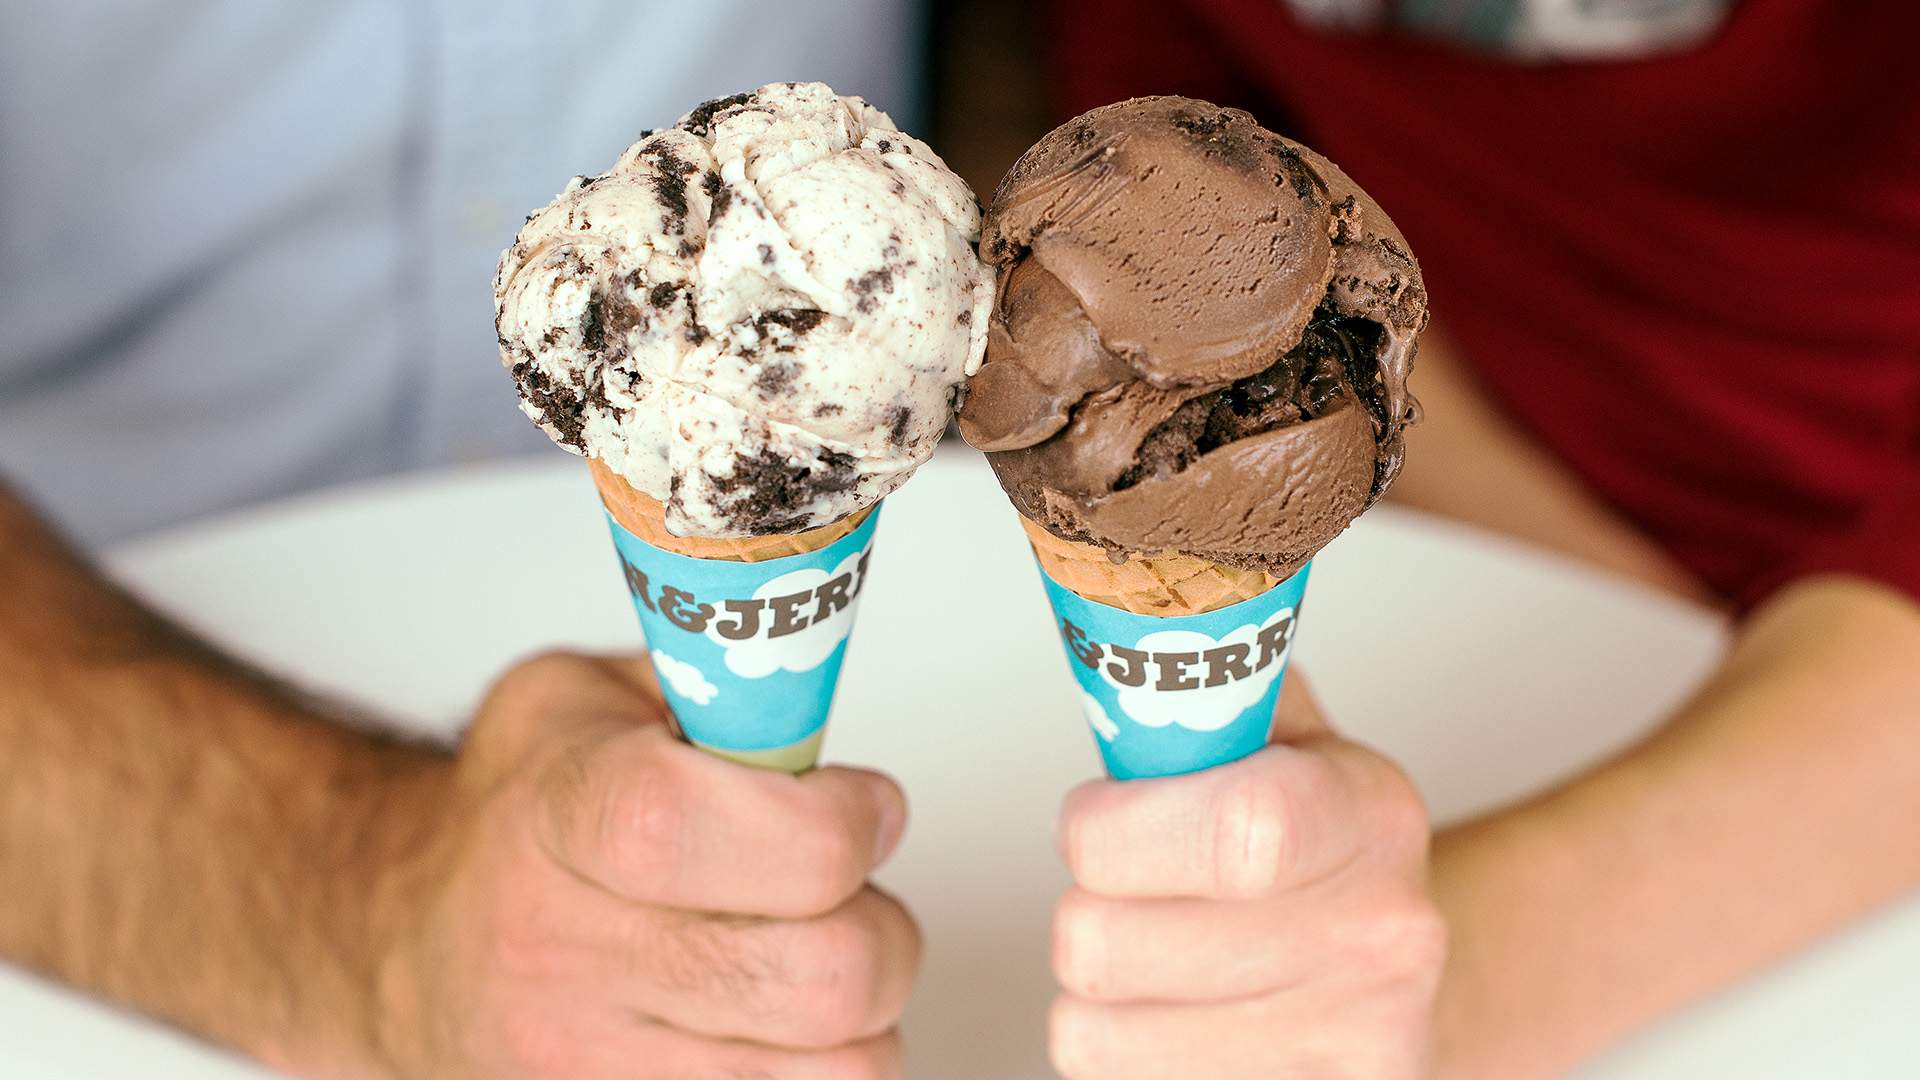 Ben & Jerry's Will Give Out Free Ice Cream Cones to Celebrate Marriage Equality